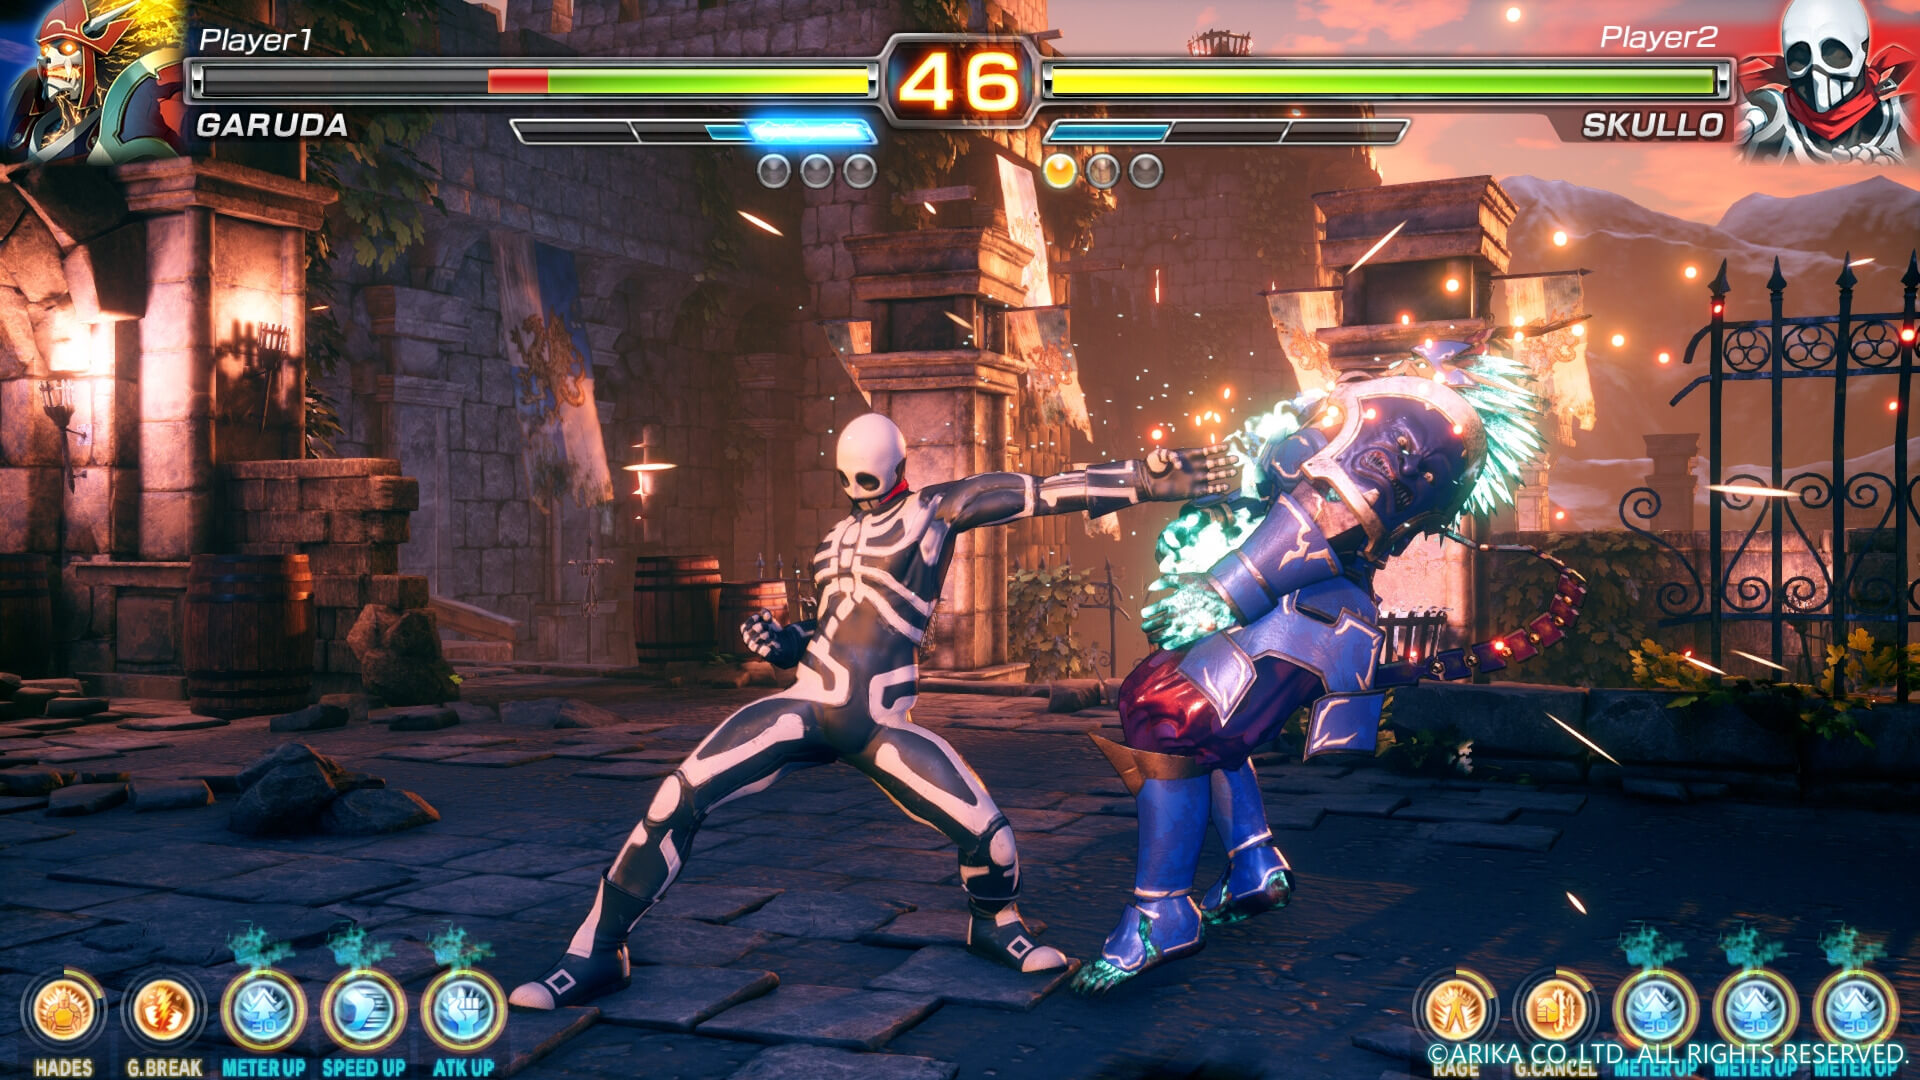 ARIKA is looking into bringing its new fighting game, Fighting EX Layer